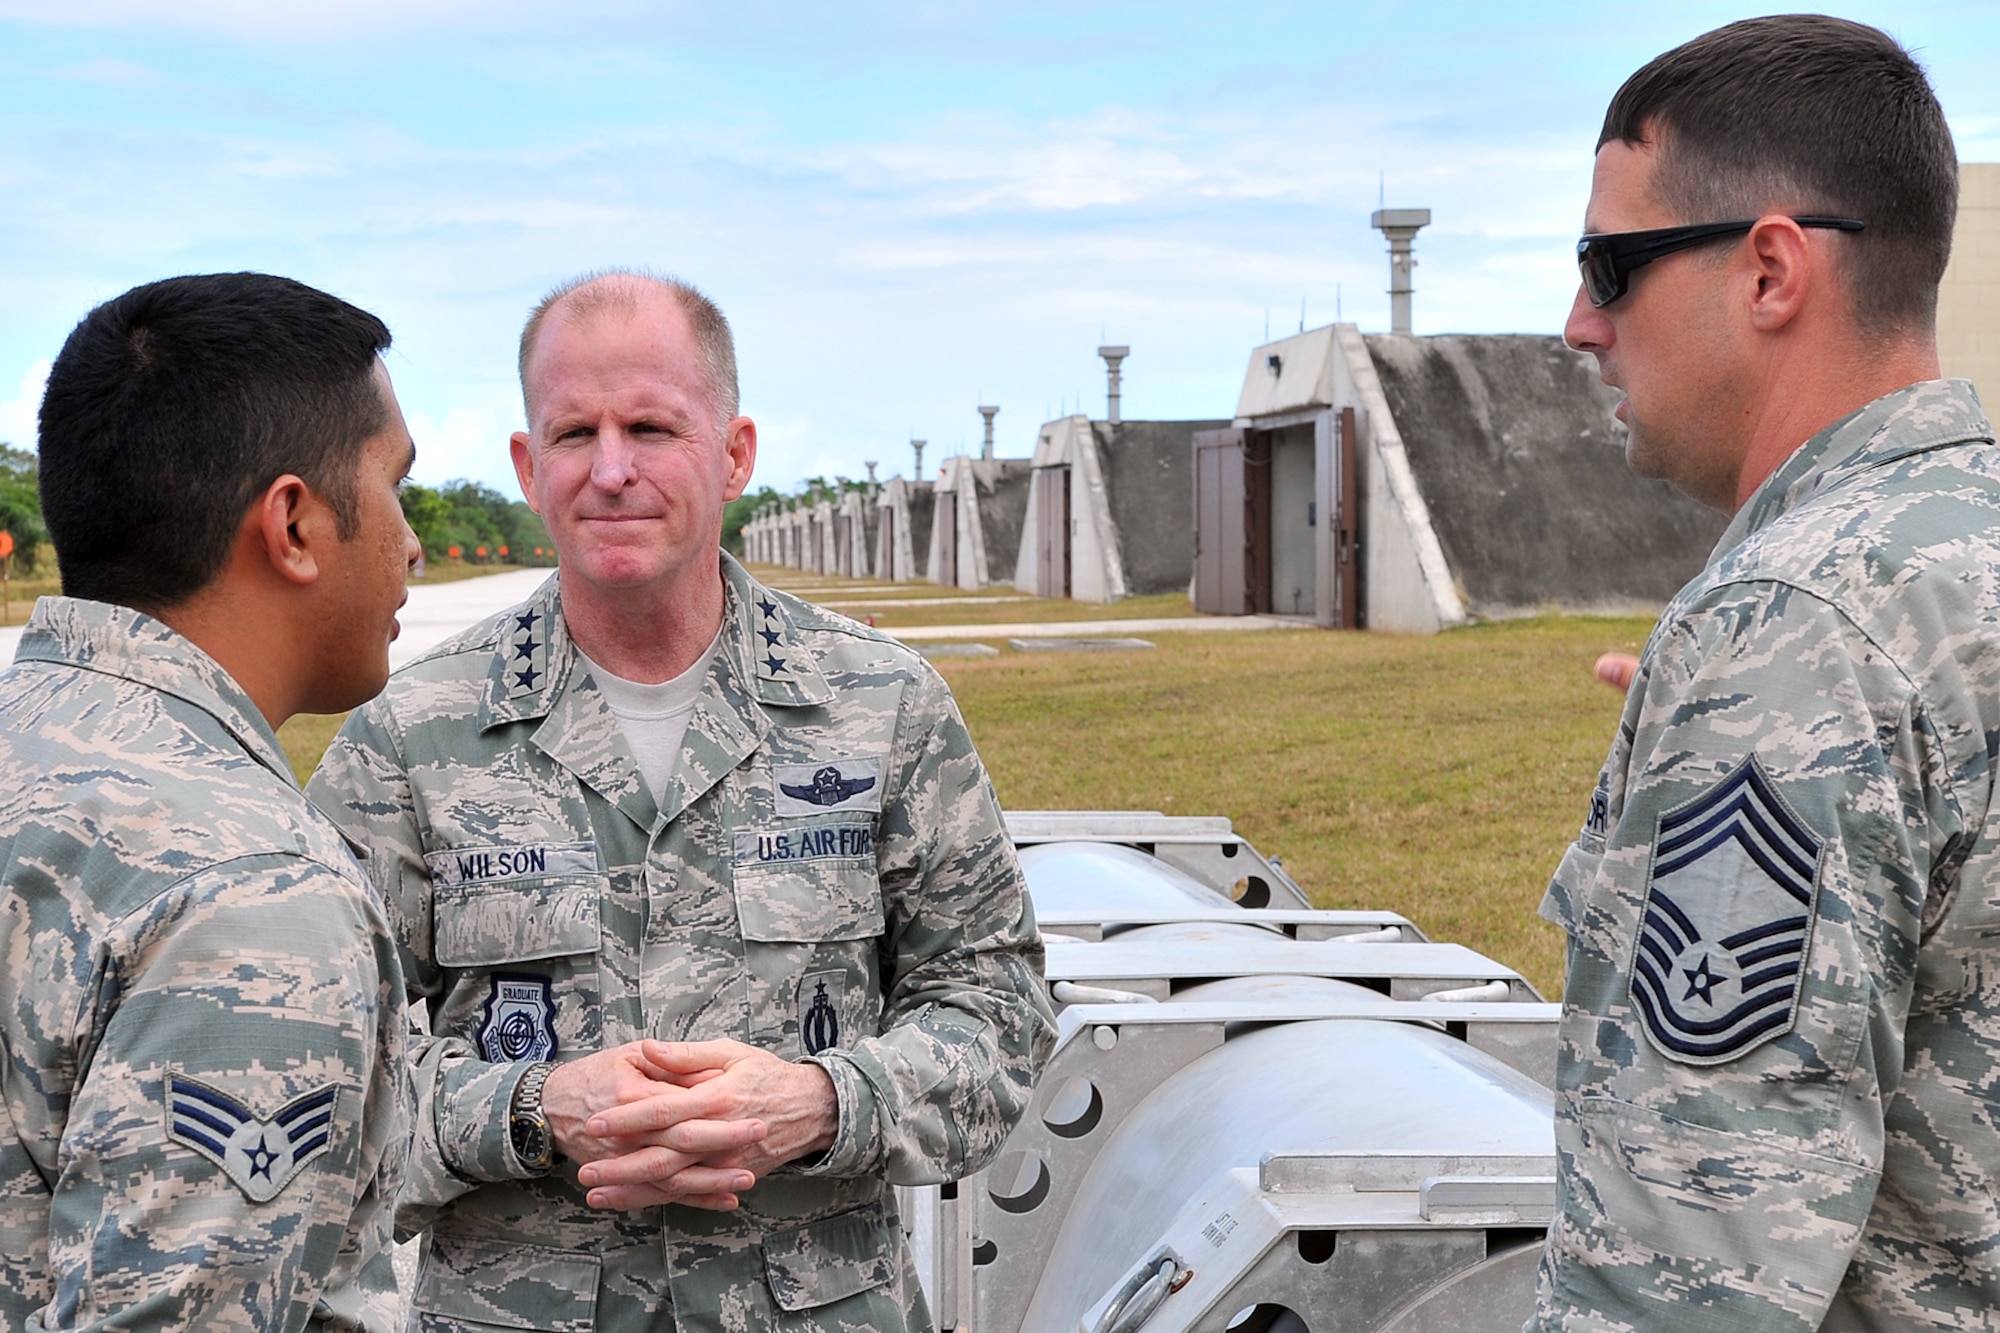 Lt. Gen. Stephen Wilson, commander of Air Force Global Strike Command, visits with Senior Airman J. Babauta, 36th Munitions Squadron munitions storage crew chief and scheduler, and Chief Master Sgt. Jason Menzel, 36th MUNS superintendent, March 3, 2015, at Andersen Air Force Base, Guam. Wilson received one-on-one feedback from Airmen supporting the Continuous Bomber Presence mission in the Asia-Pacific region. (U.S. Air Force photo by Staff Sgt. Melissa B. White/Released)